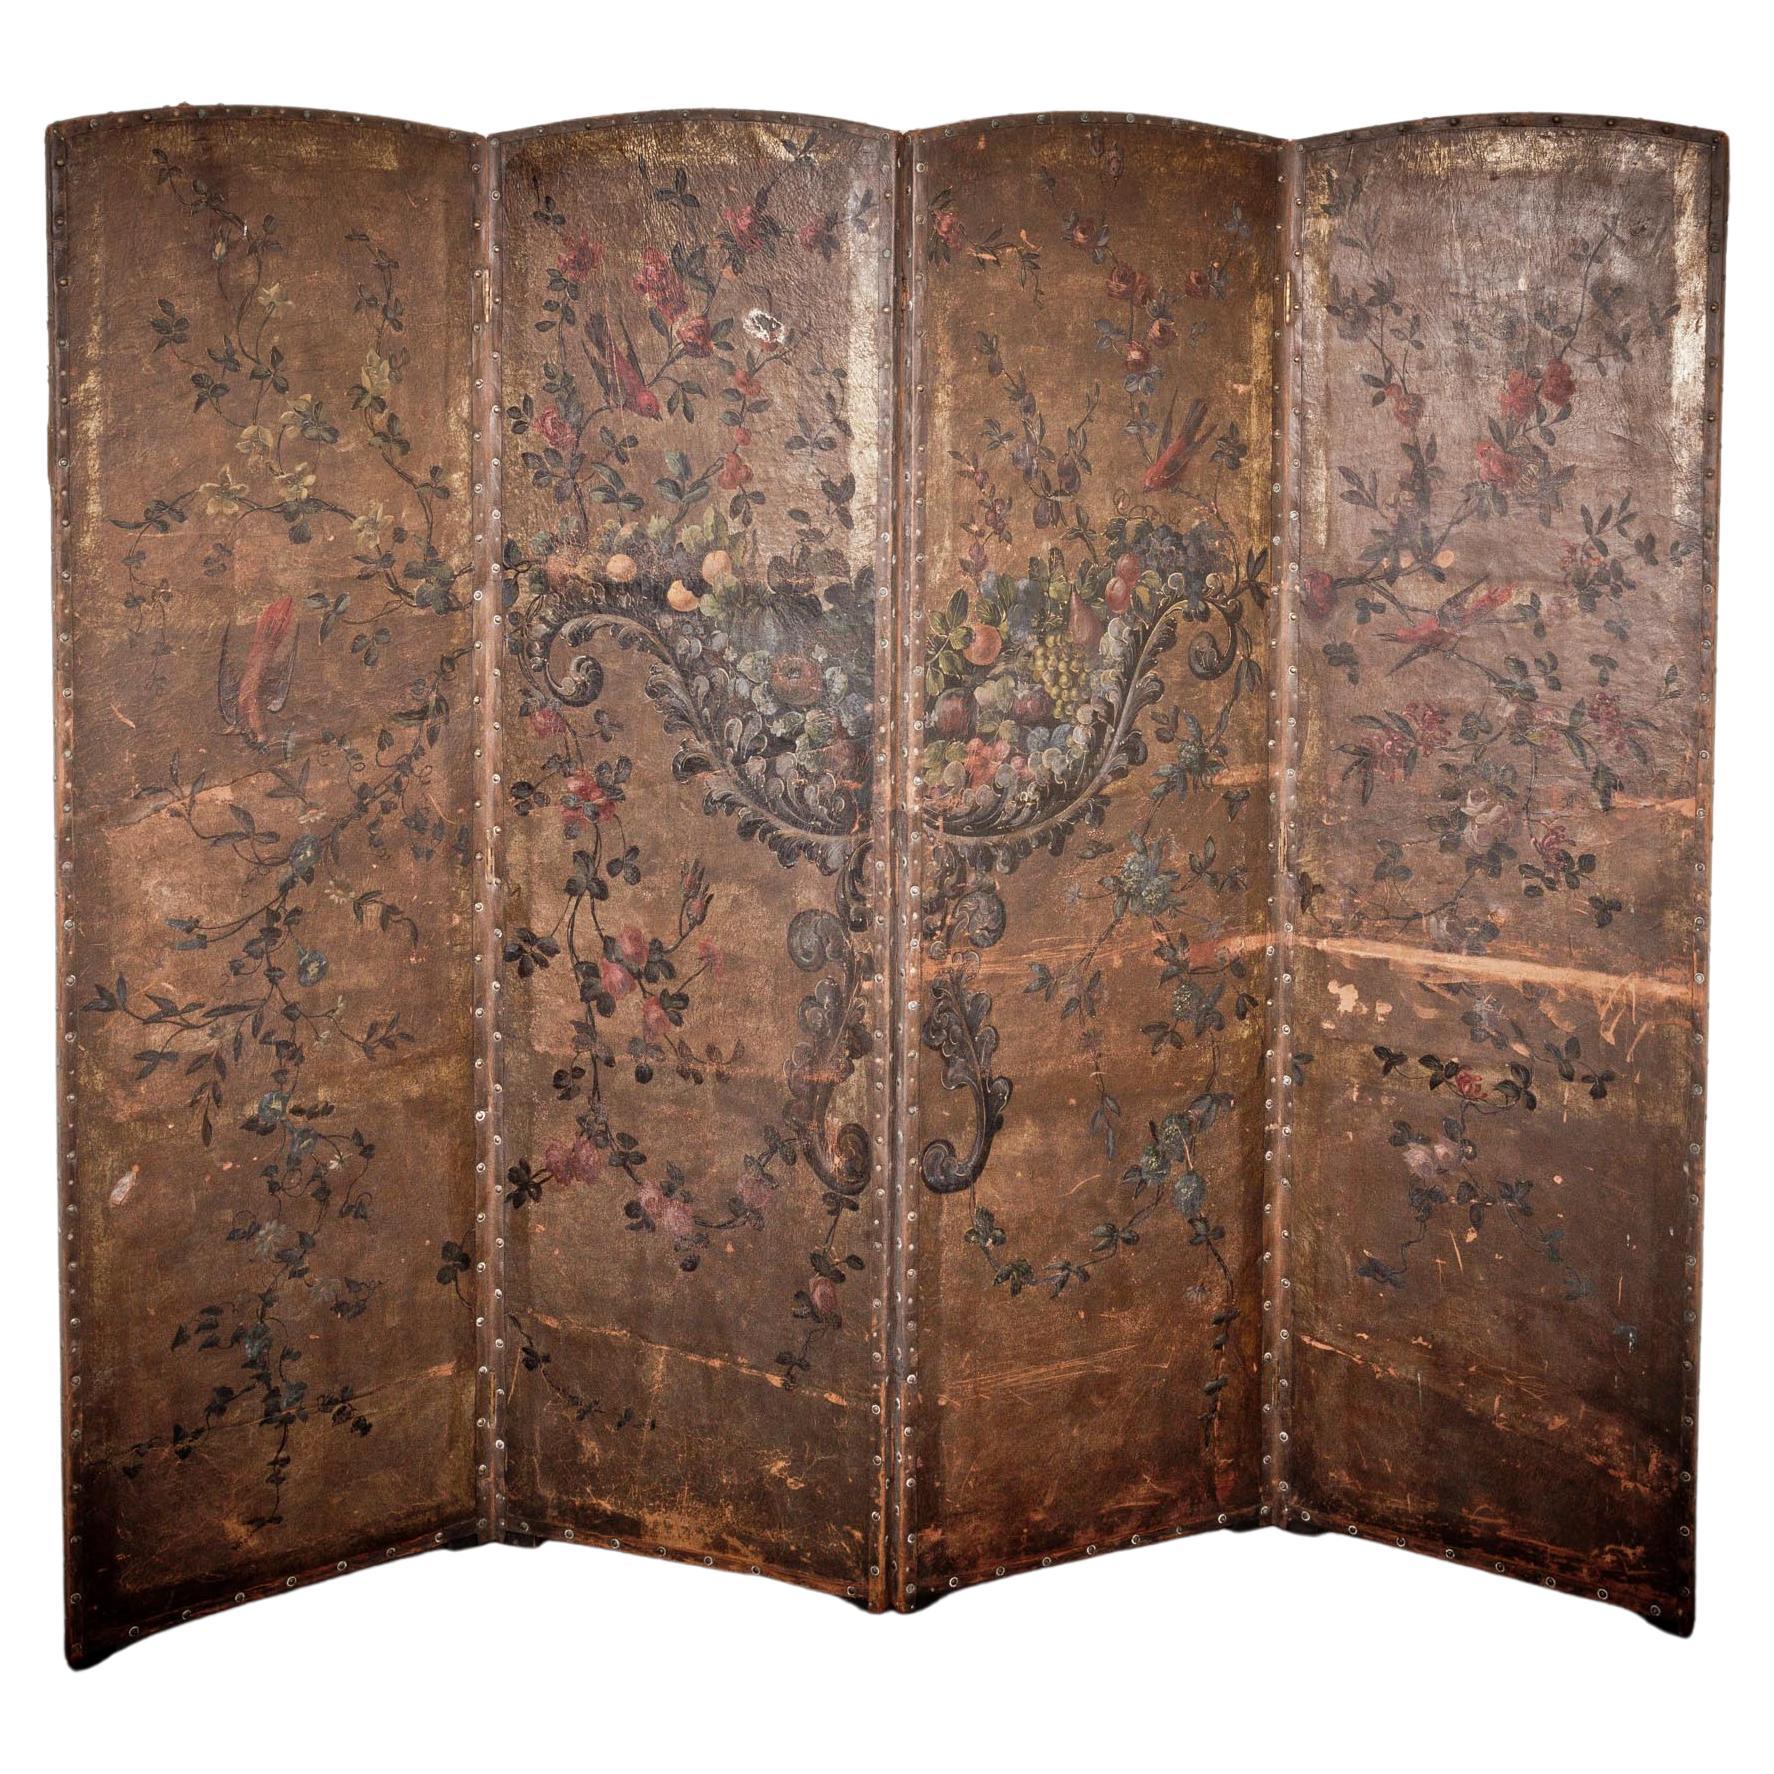 An exquisite early 19th Century hand painted four-fold leather room divider. For Sale